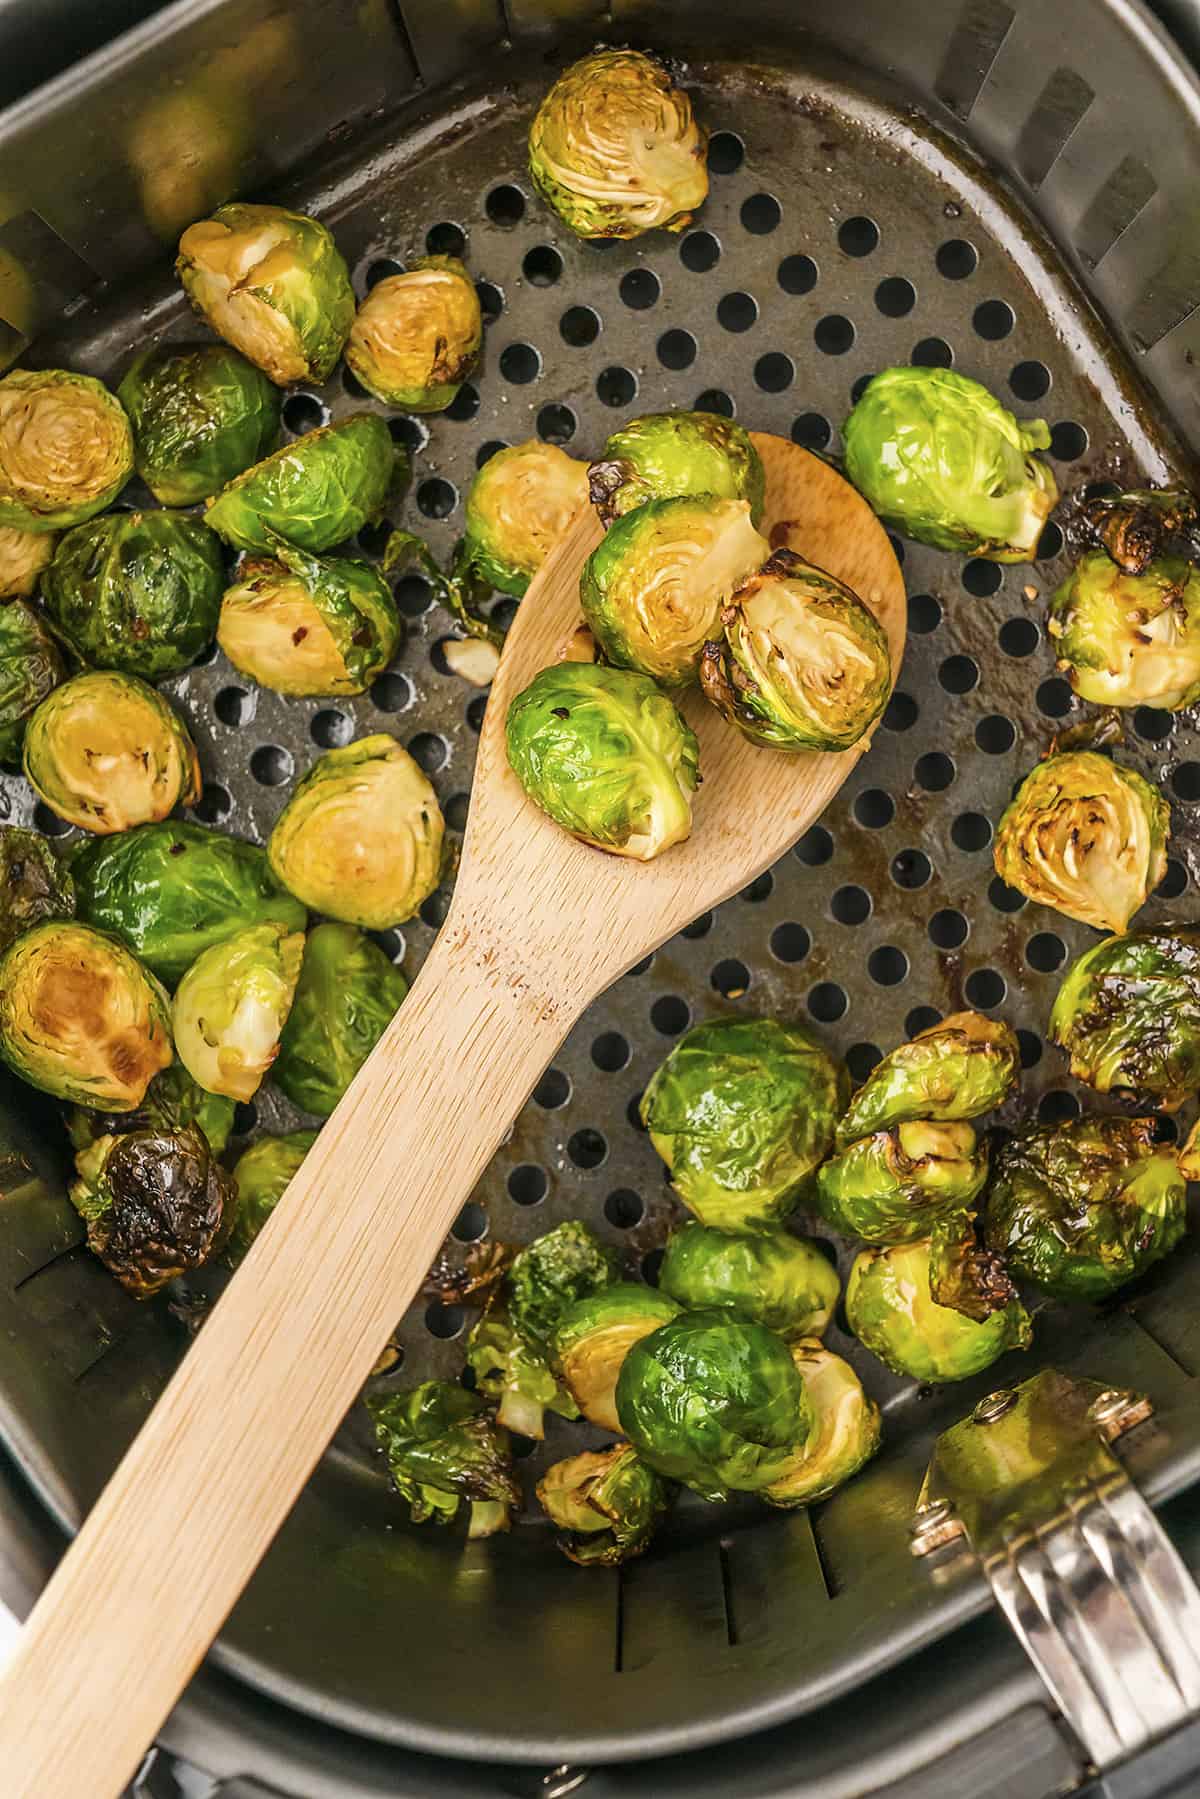 Brussels sprouts in air fryer basket.